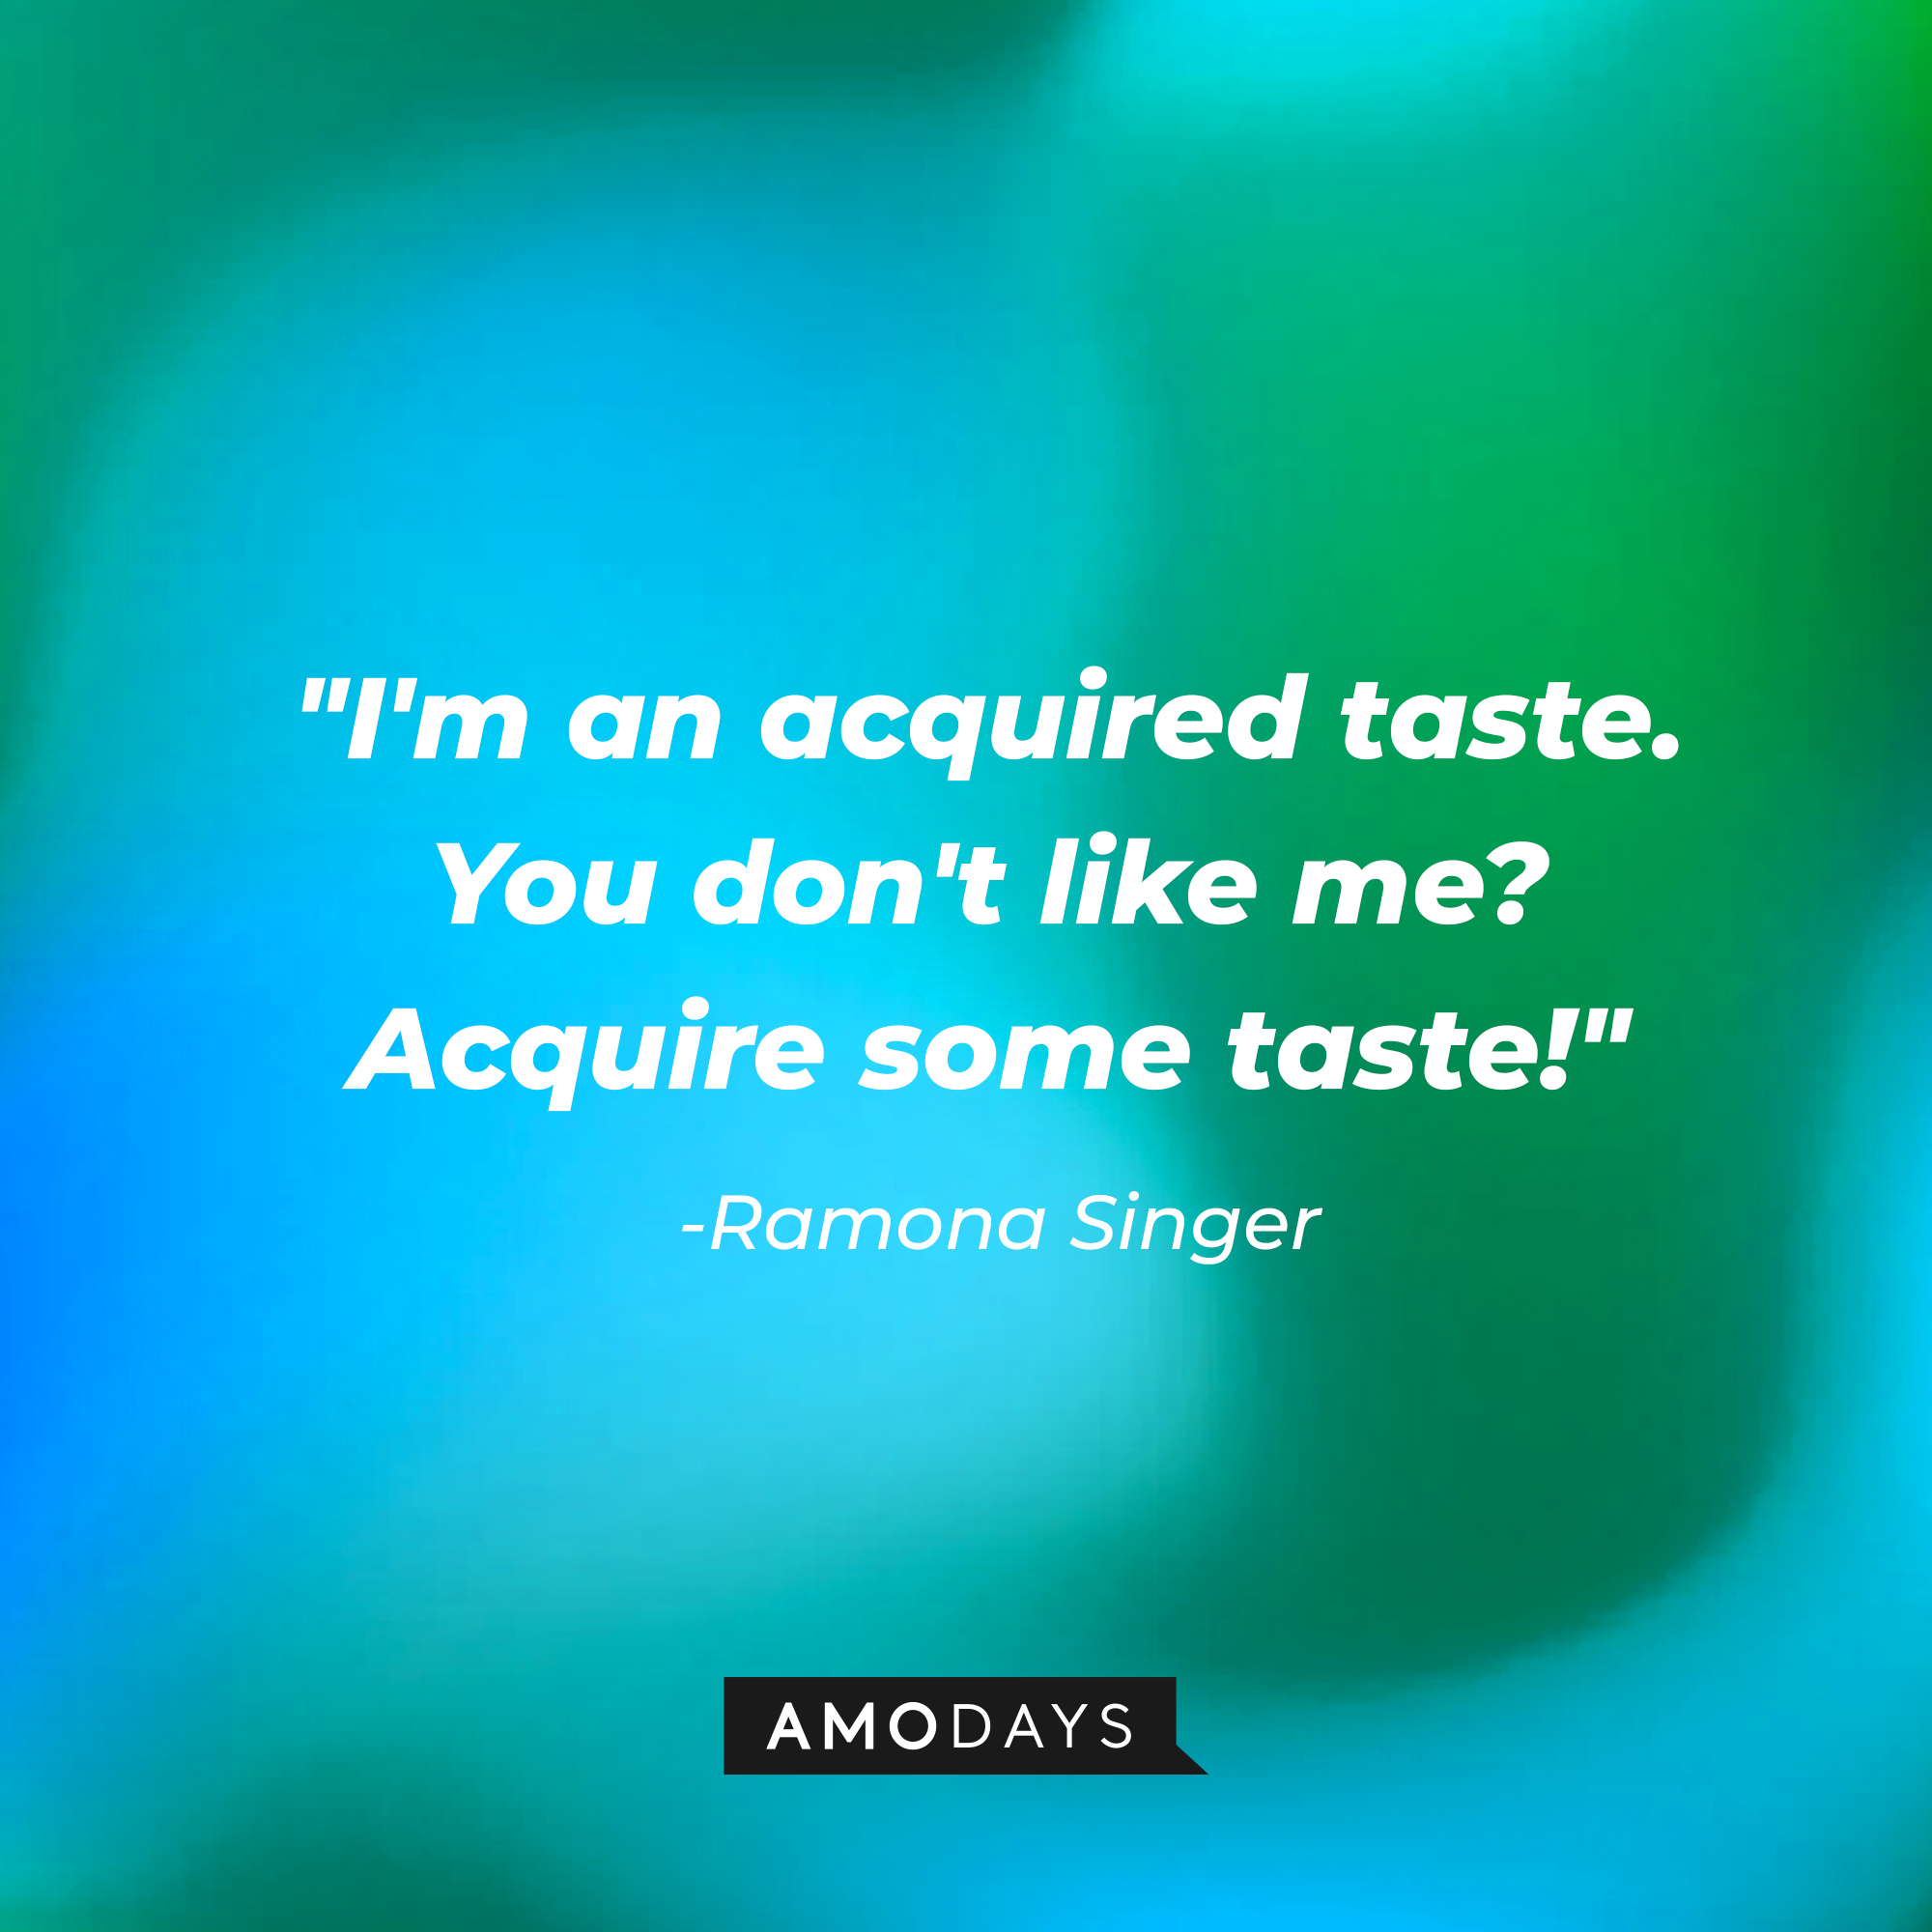 Ramona Singer’s quote: "I'm an acquired taste. You don't like me? Acquire some taste!" | Source: AmoDays